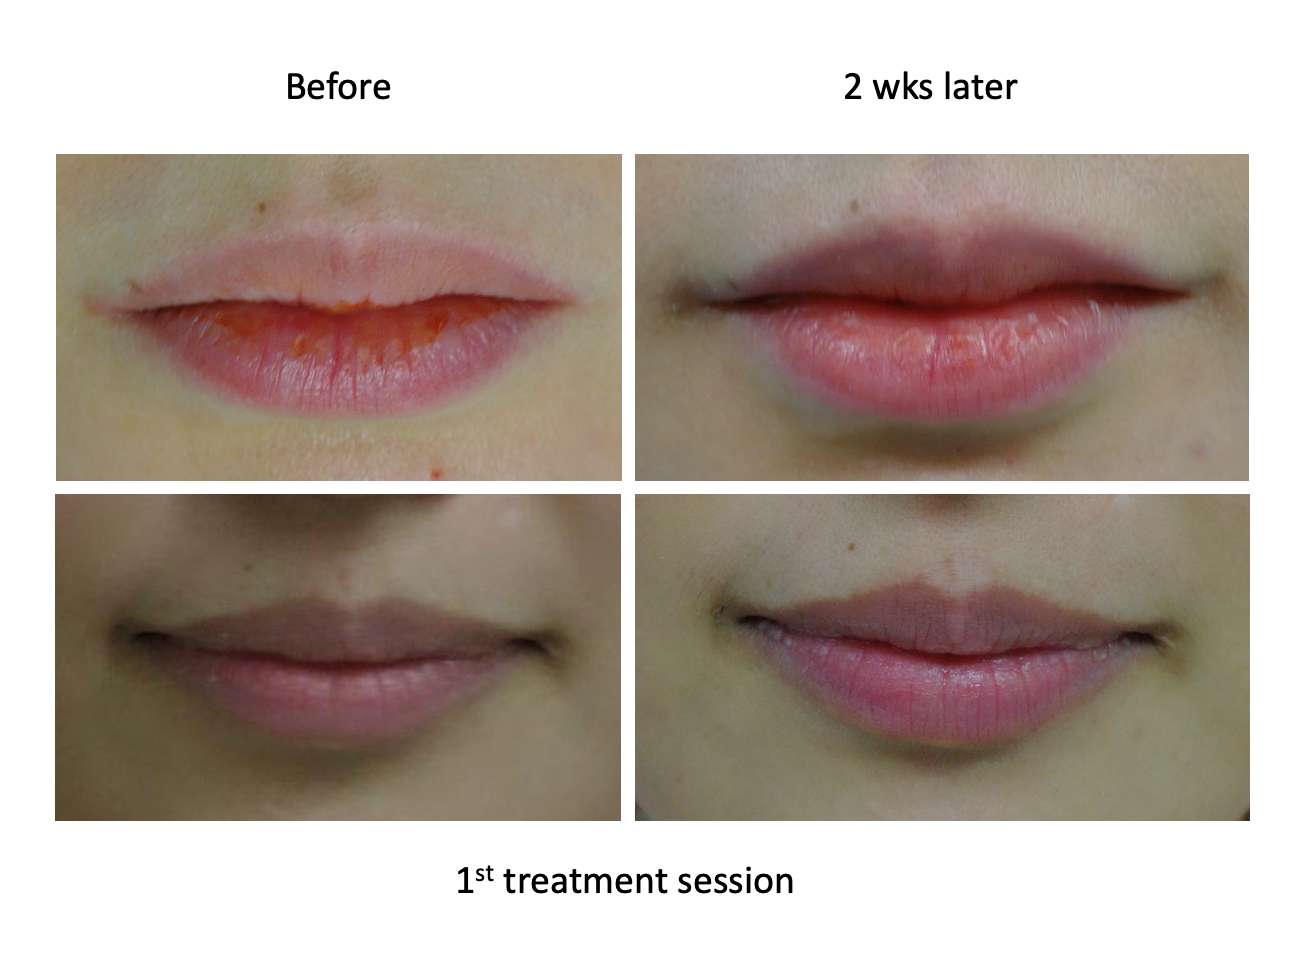 Our erbium Laser does more than give lip service. It offers lip rejuvenation in two ways – it can rejuvenate the texture of your lips and restore lip color.